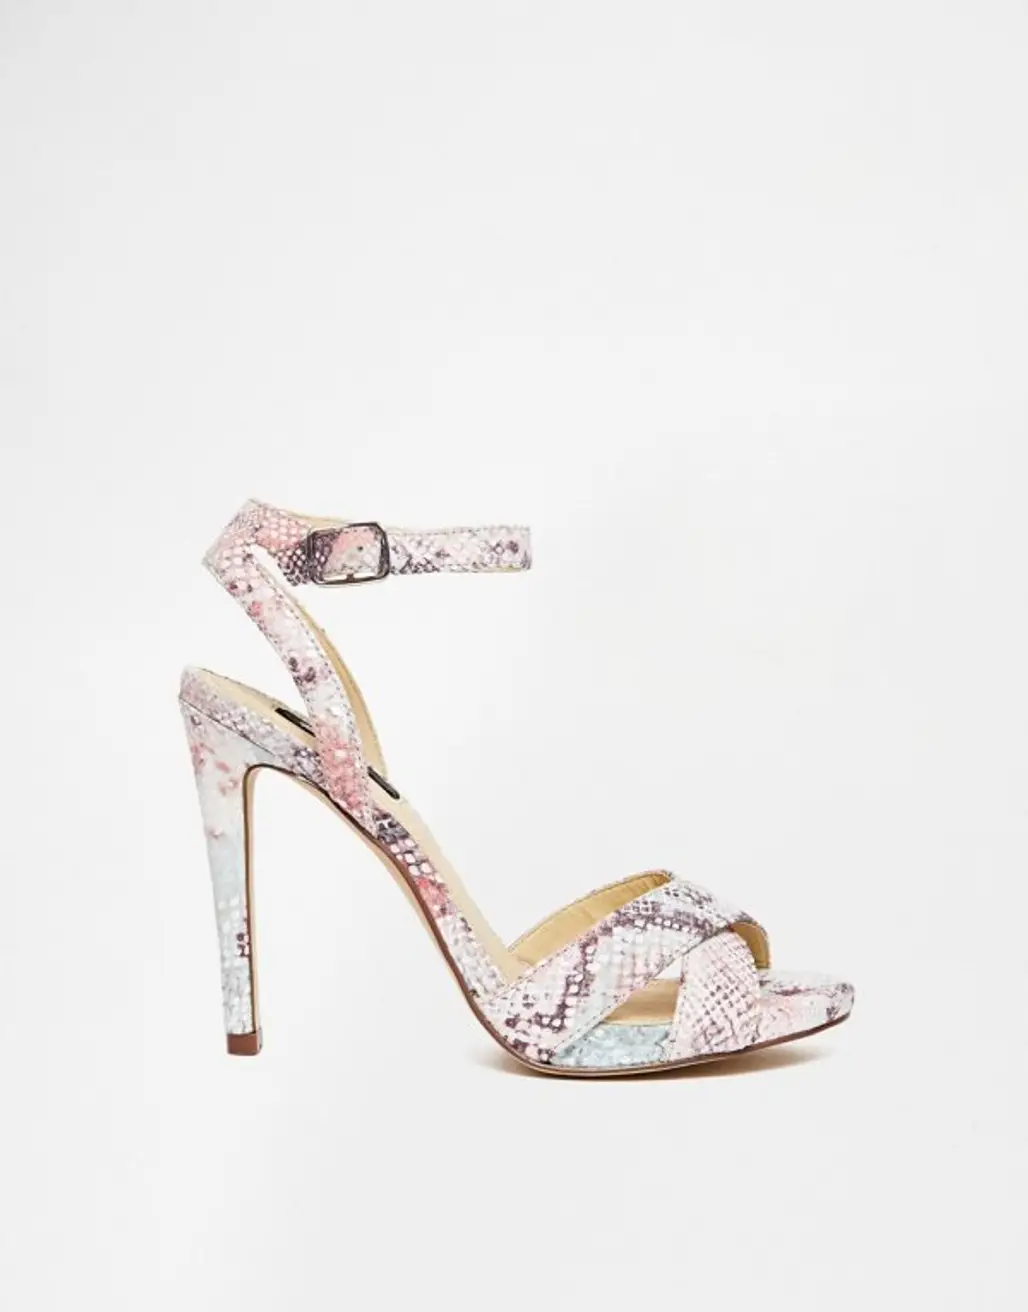 Blink Pastel Snake Print Barely There Sandals